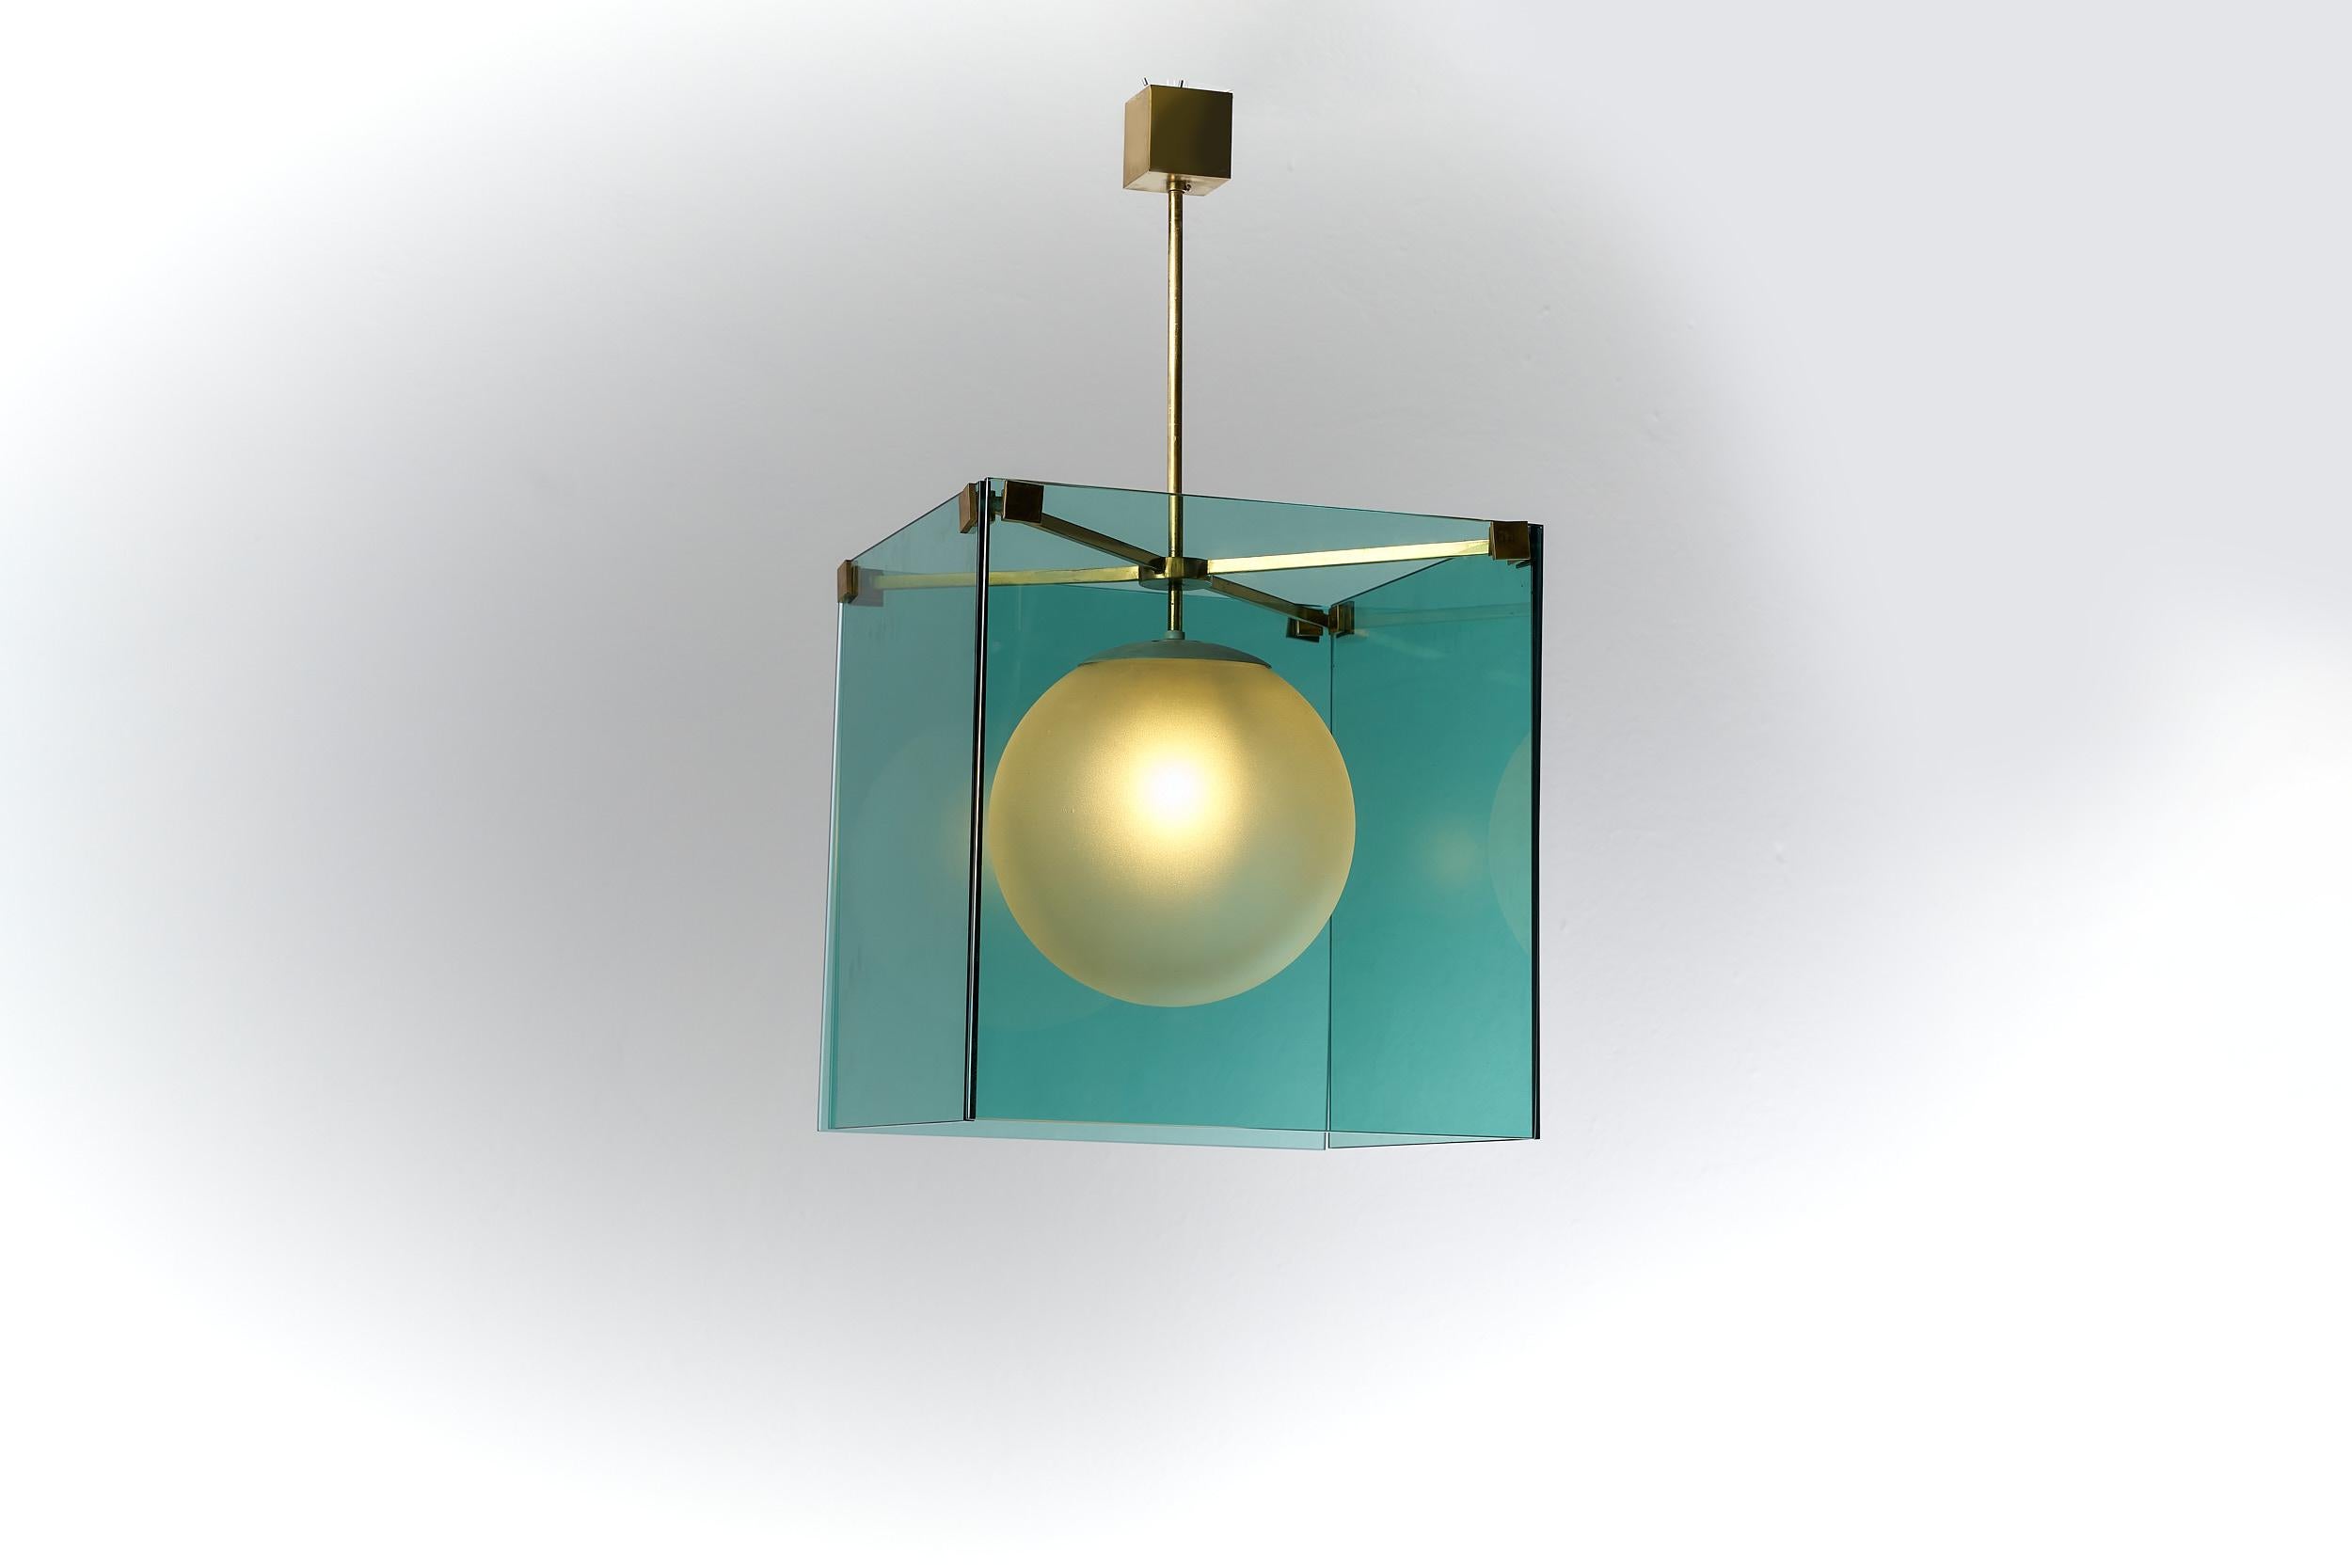 Embodying Max Ingrand's signature elegance, this ceiling light marries functionality and aesthetics. Crafted during his directorship at Fontana Arte, it showcases his skilled use of satin glass and polished brass. The layered design creates an